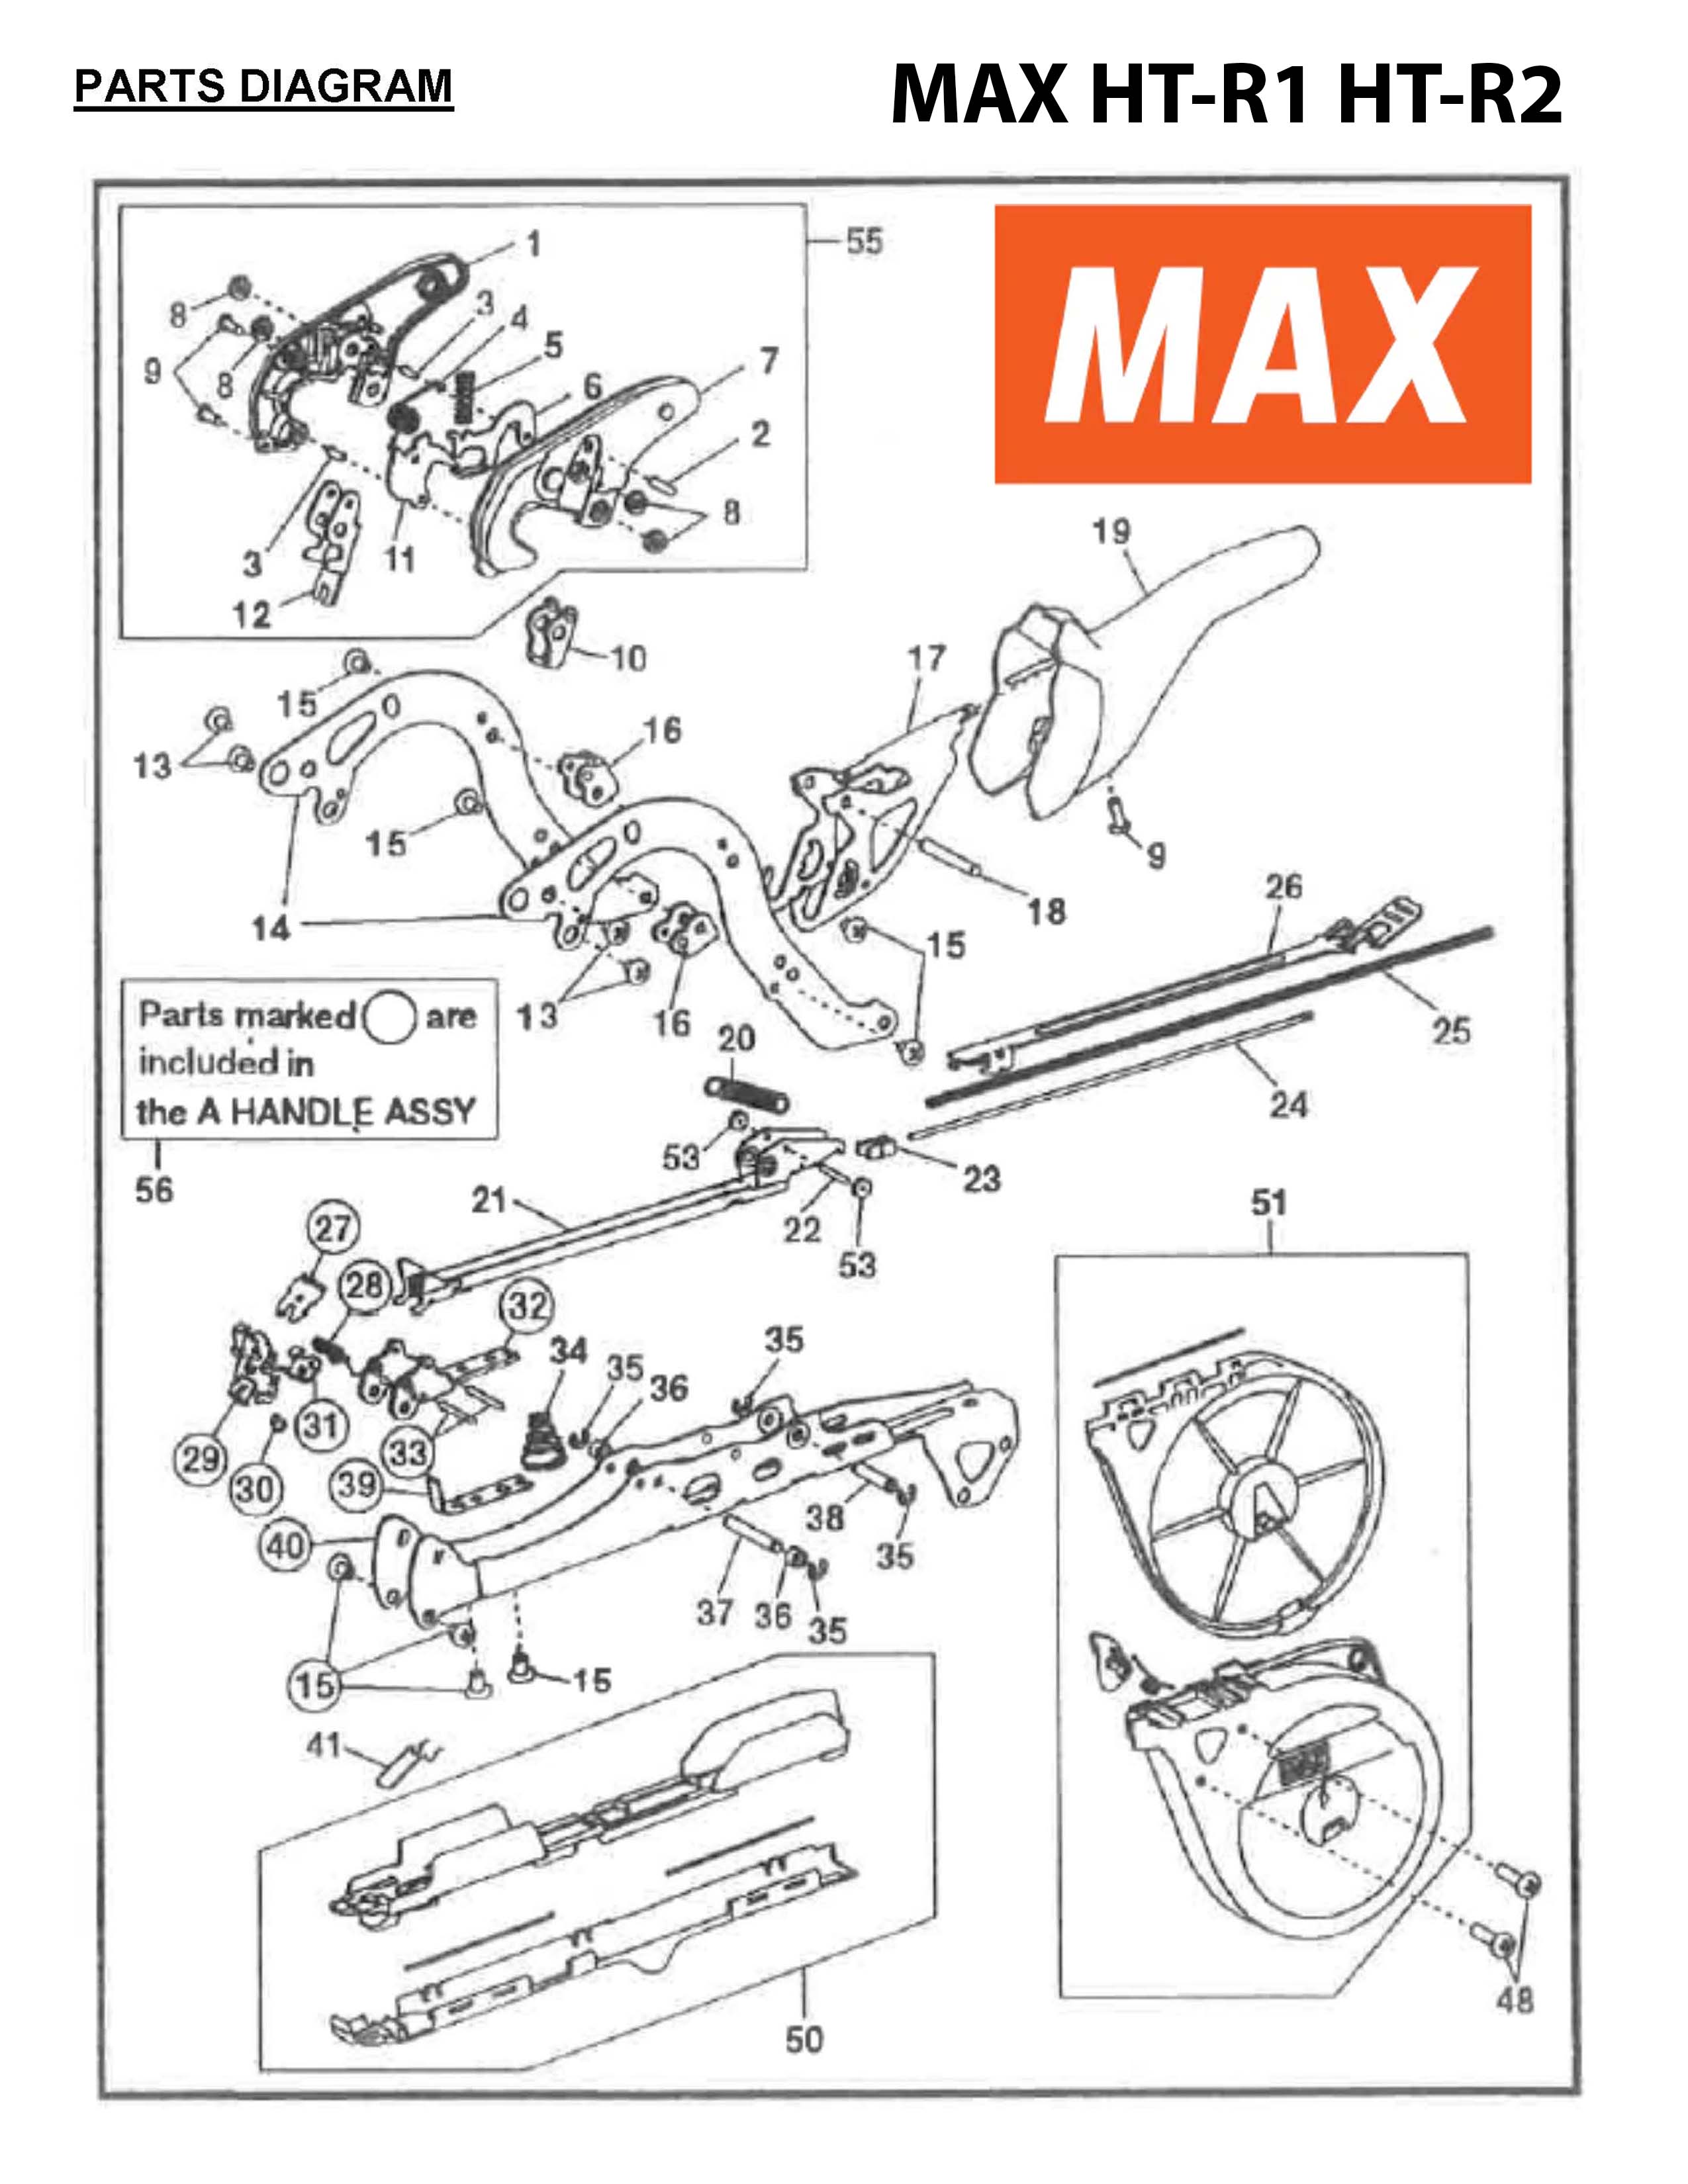 MAX Tapener Part HT11673 TAPE GUIDE BASE S Fits MAX HT-R1 HT-R2 #32